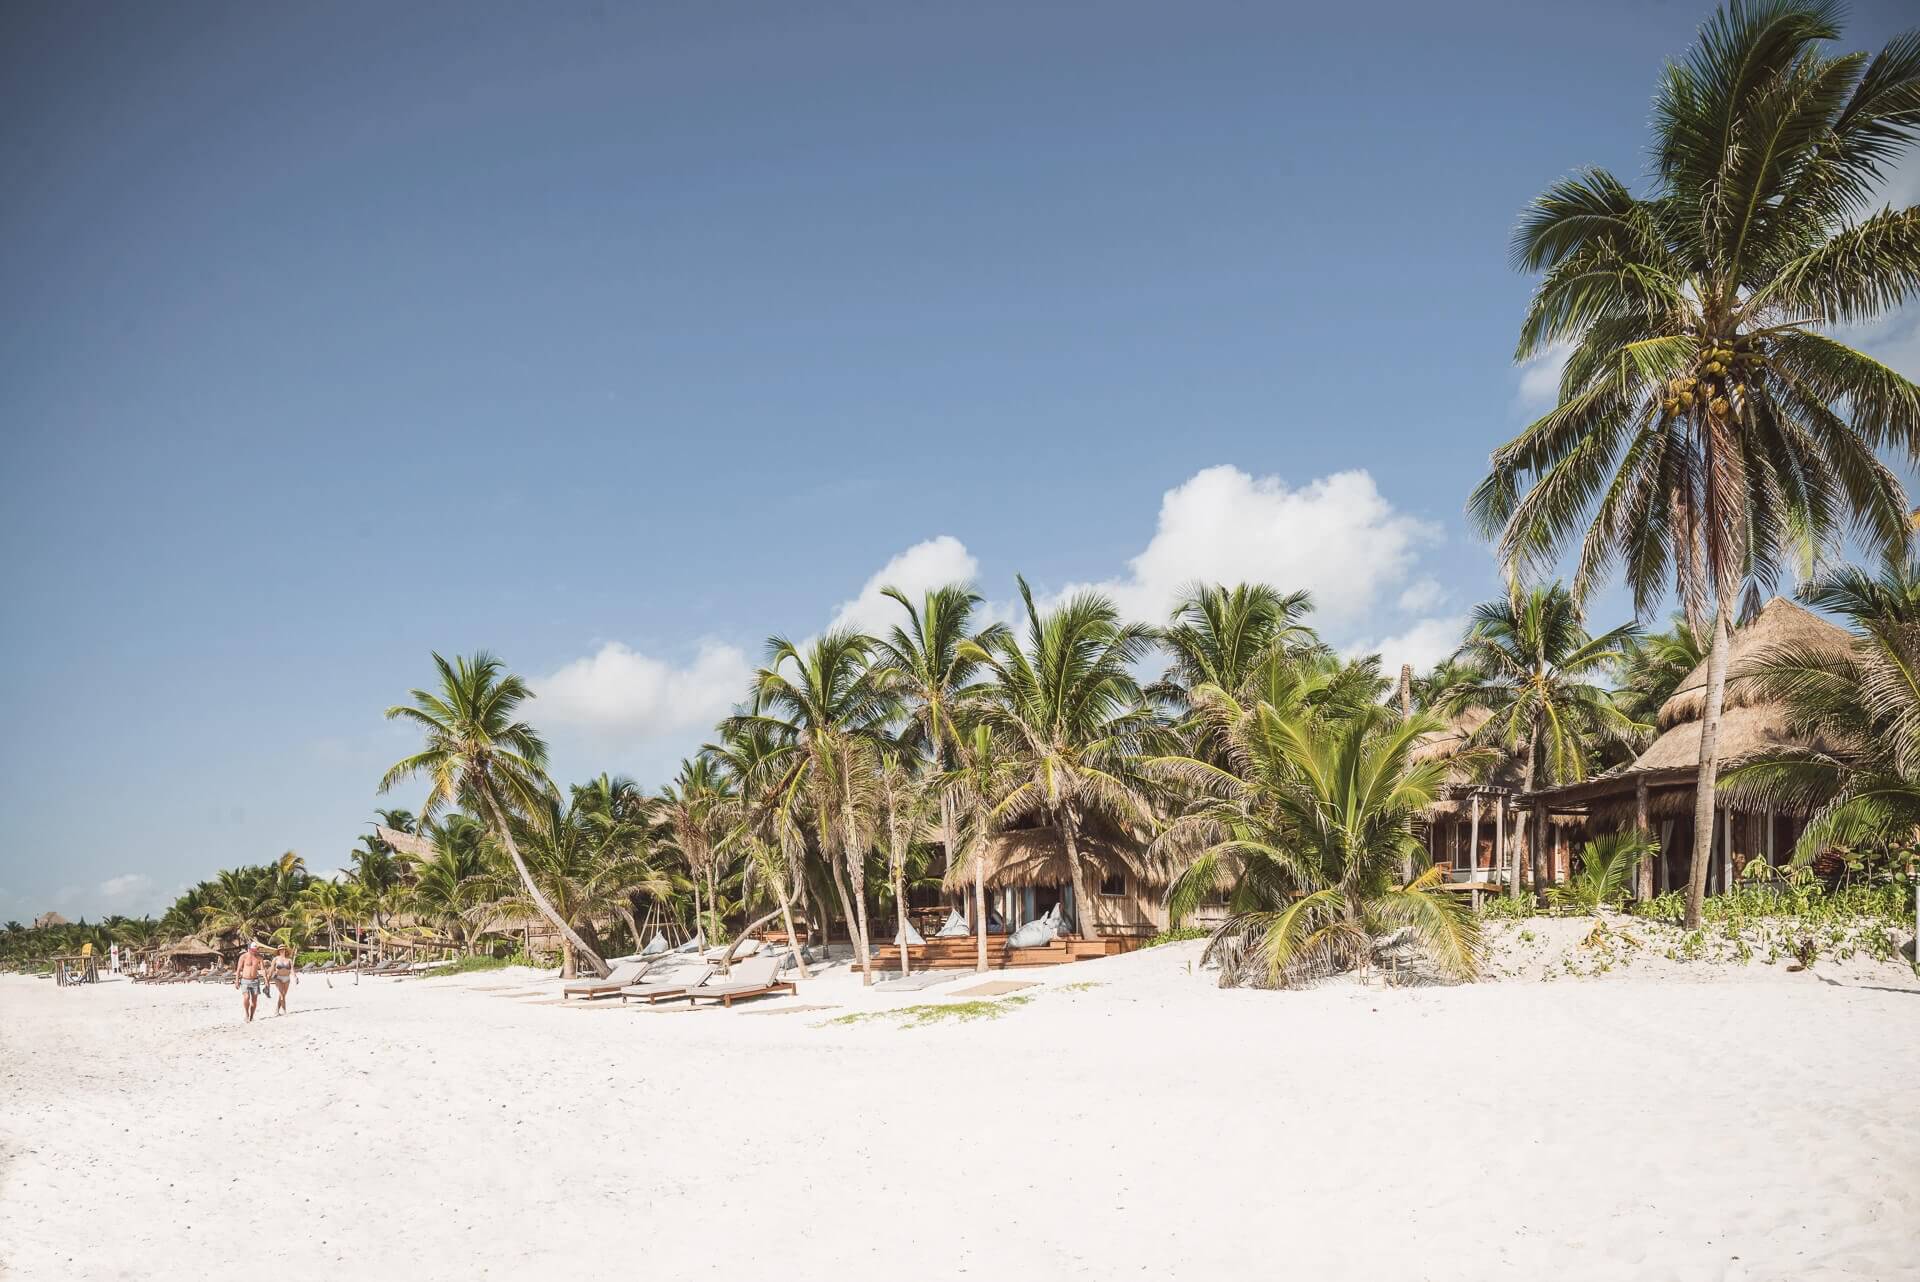 Stay at home but don’t stop dreaming about Tulum